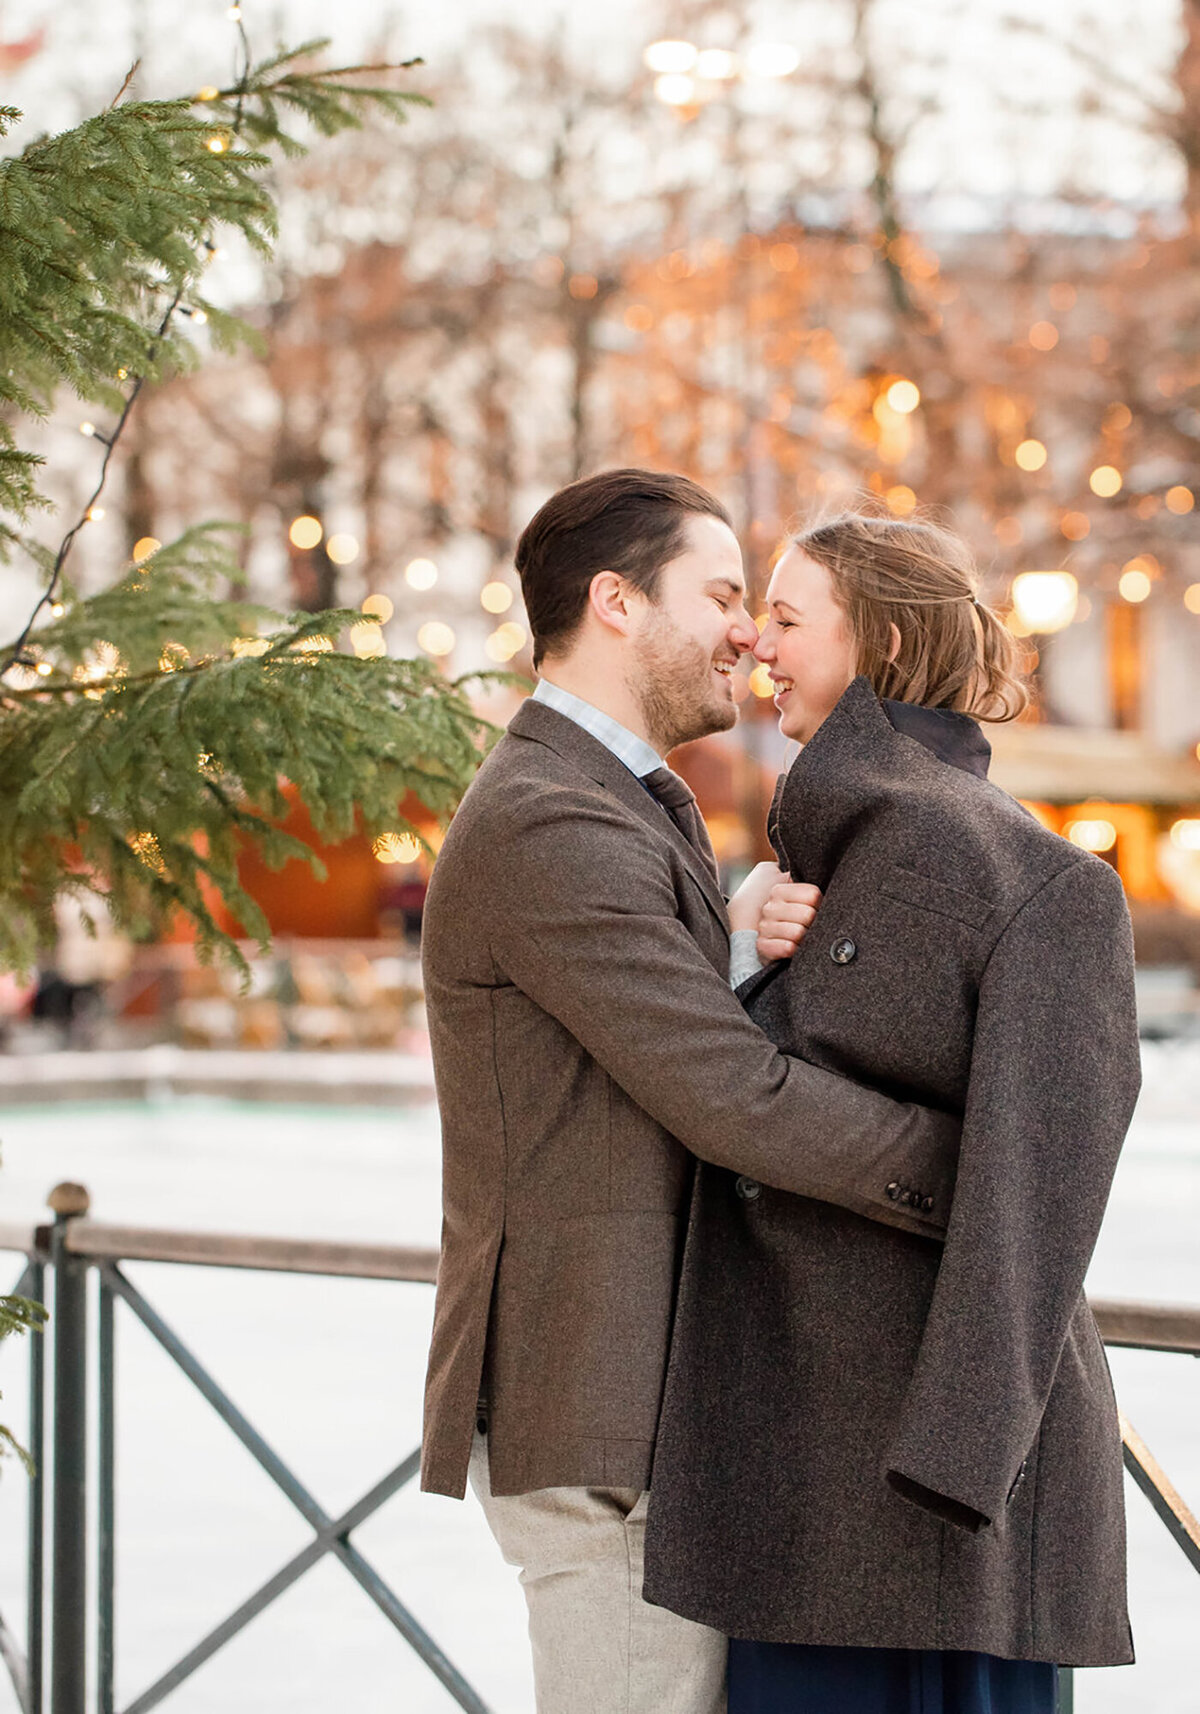 Engagement Portraits taken at the Christmas Market in Oslo Norway